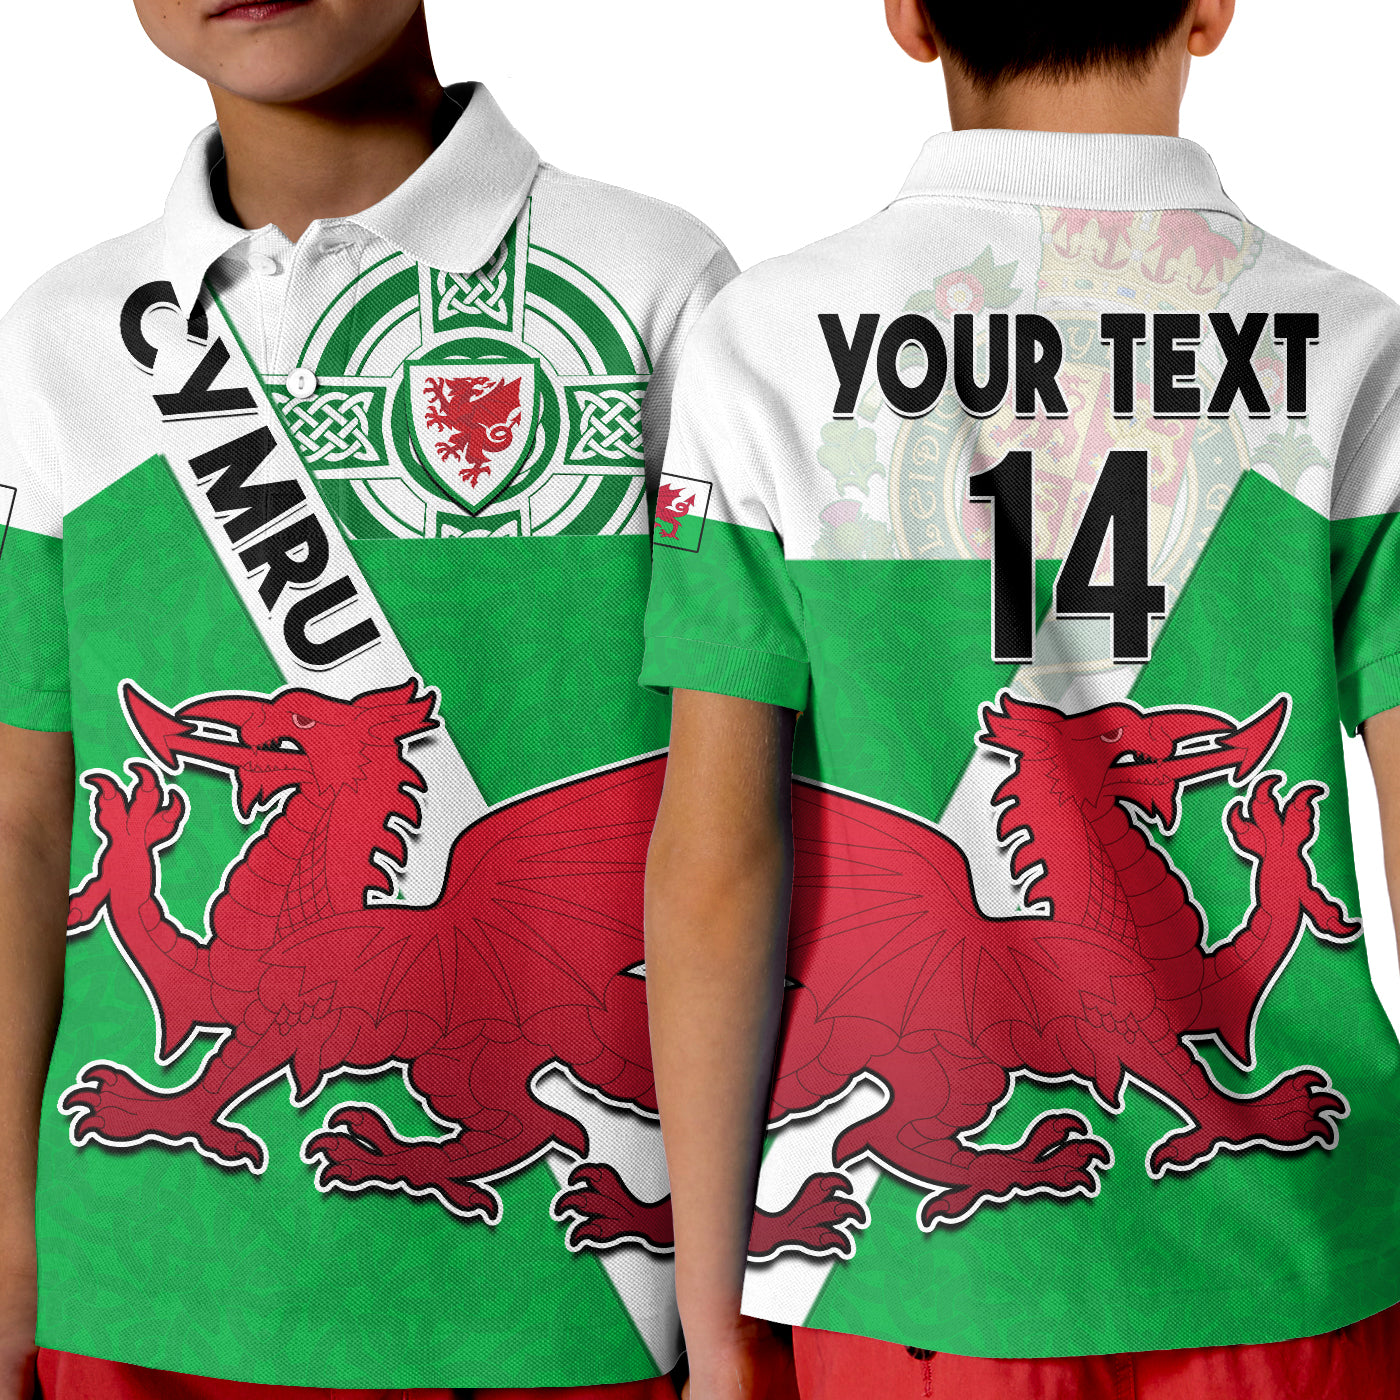 custom-text-and-number-wales-football-polo-shirt-kid-come-on-welsh-dragons-with-celtic-knot-pattern